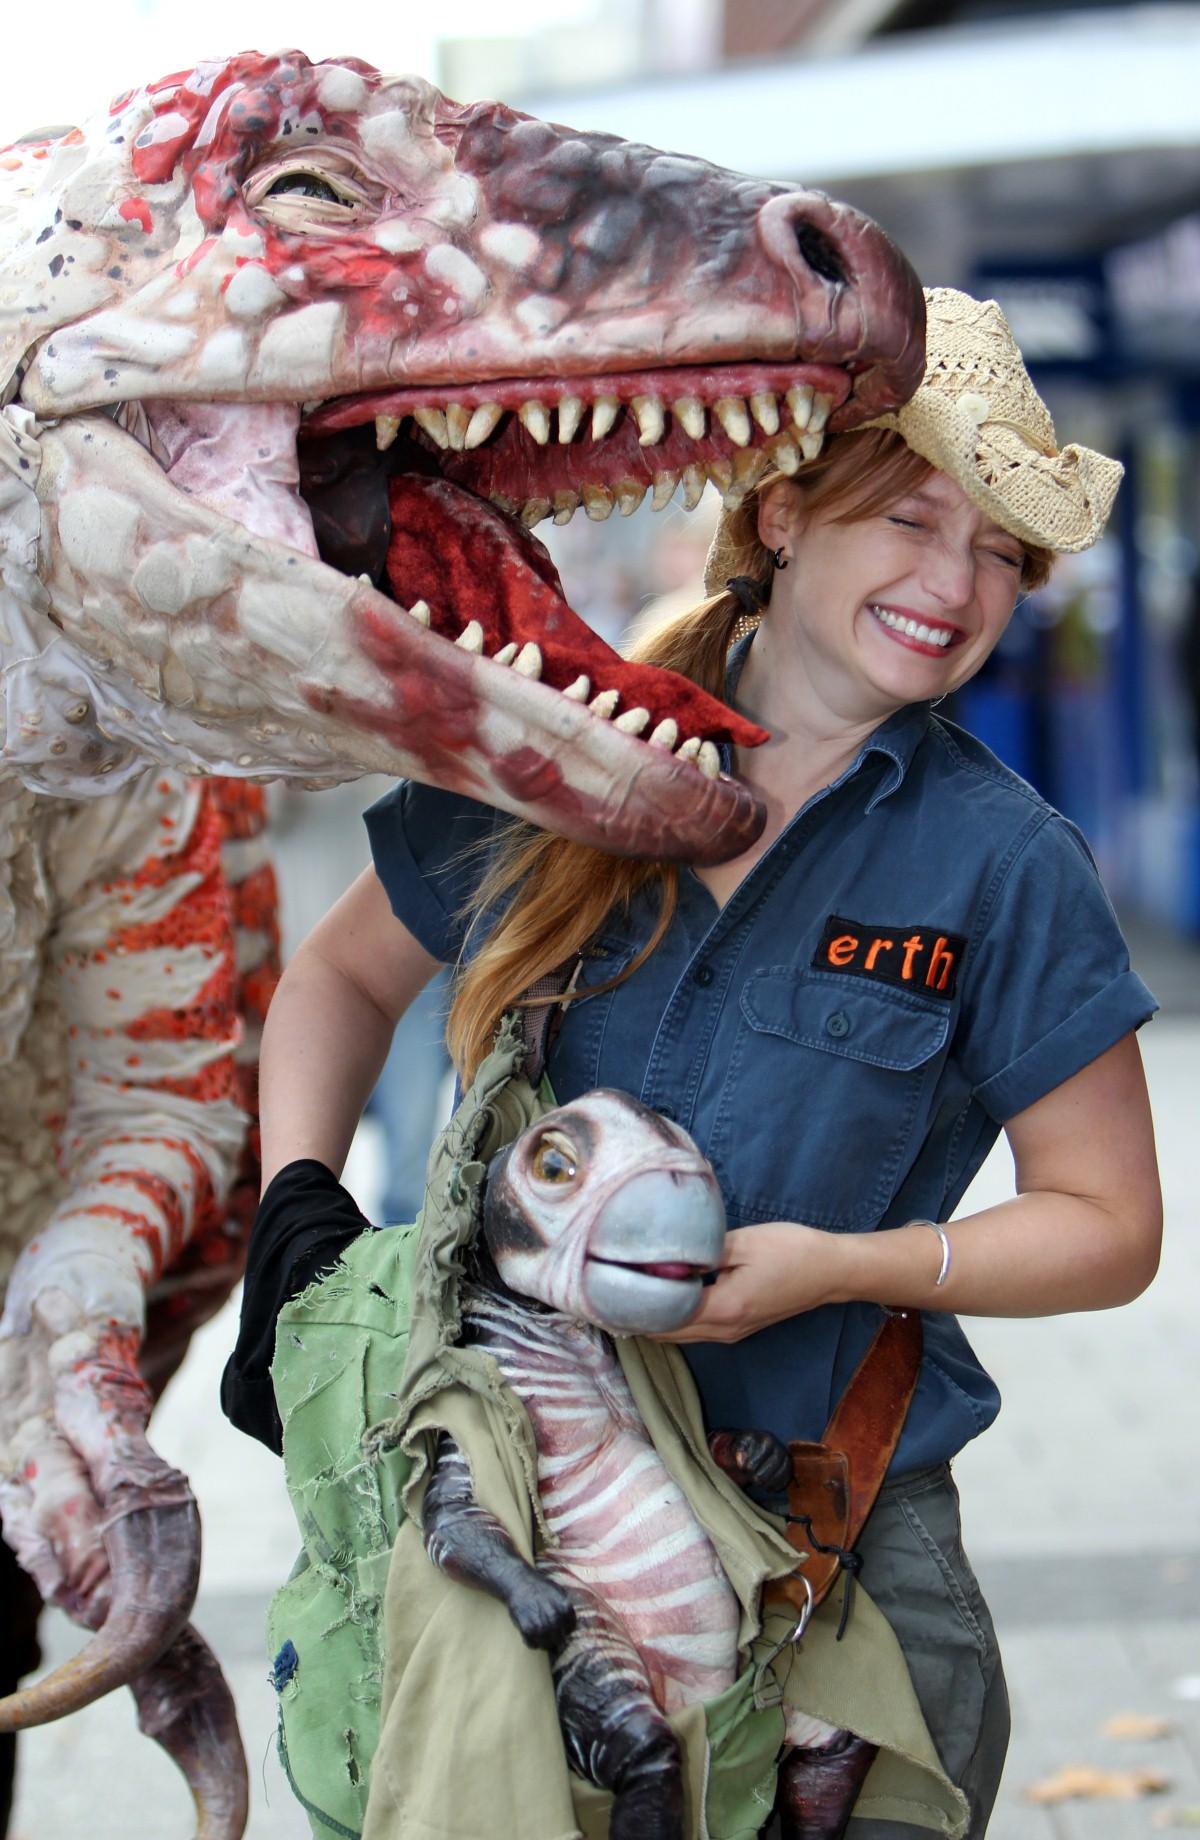 The Year in Pictures - 2013 - Dinosaur Zoo came to The Mayflower. Zookeeper Lindsey Chaplin. October 10, 2013.